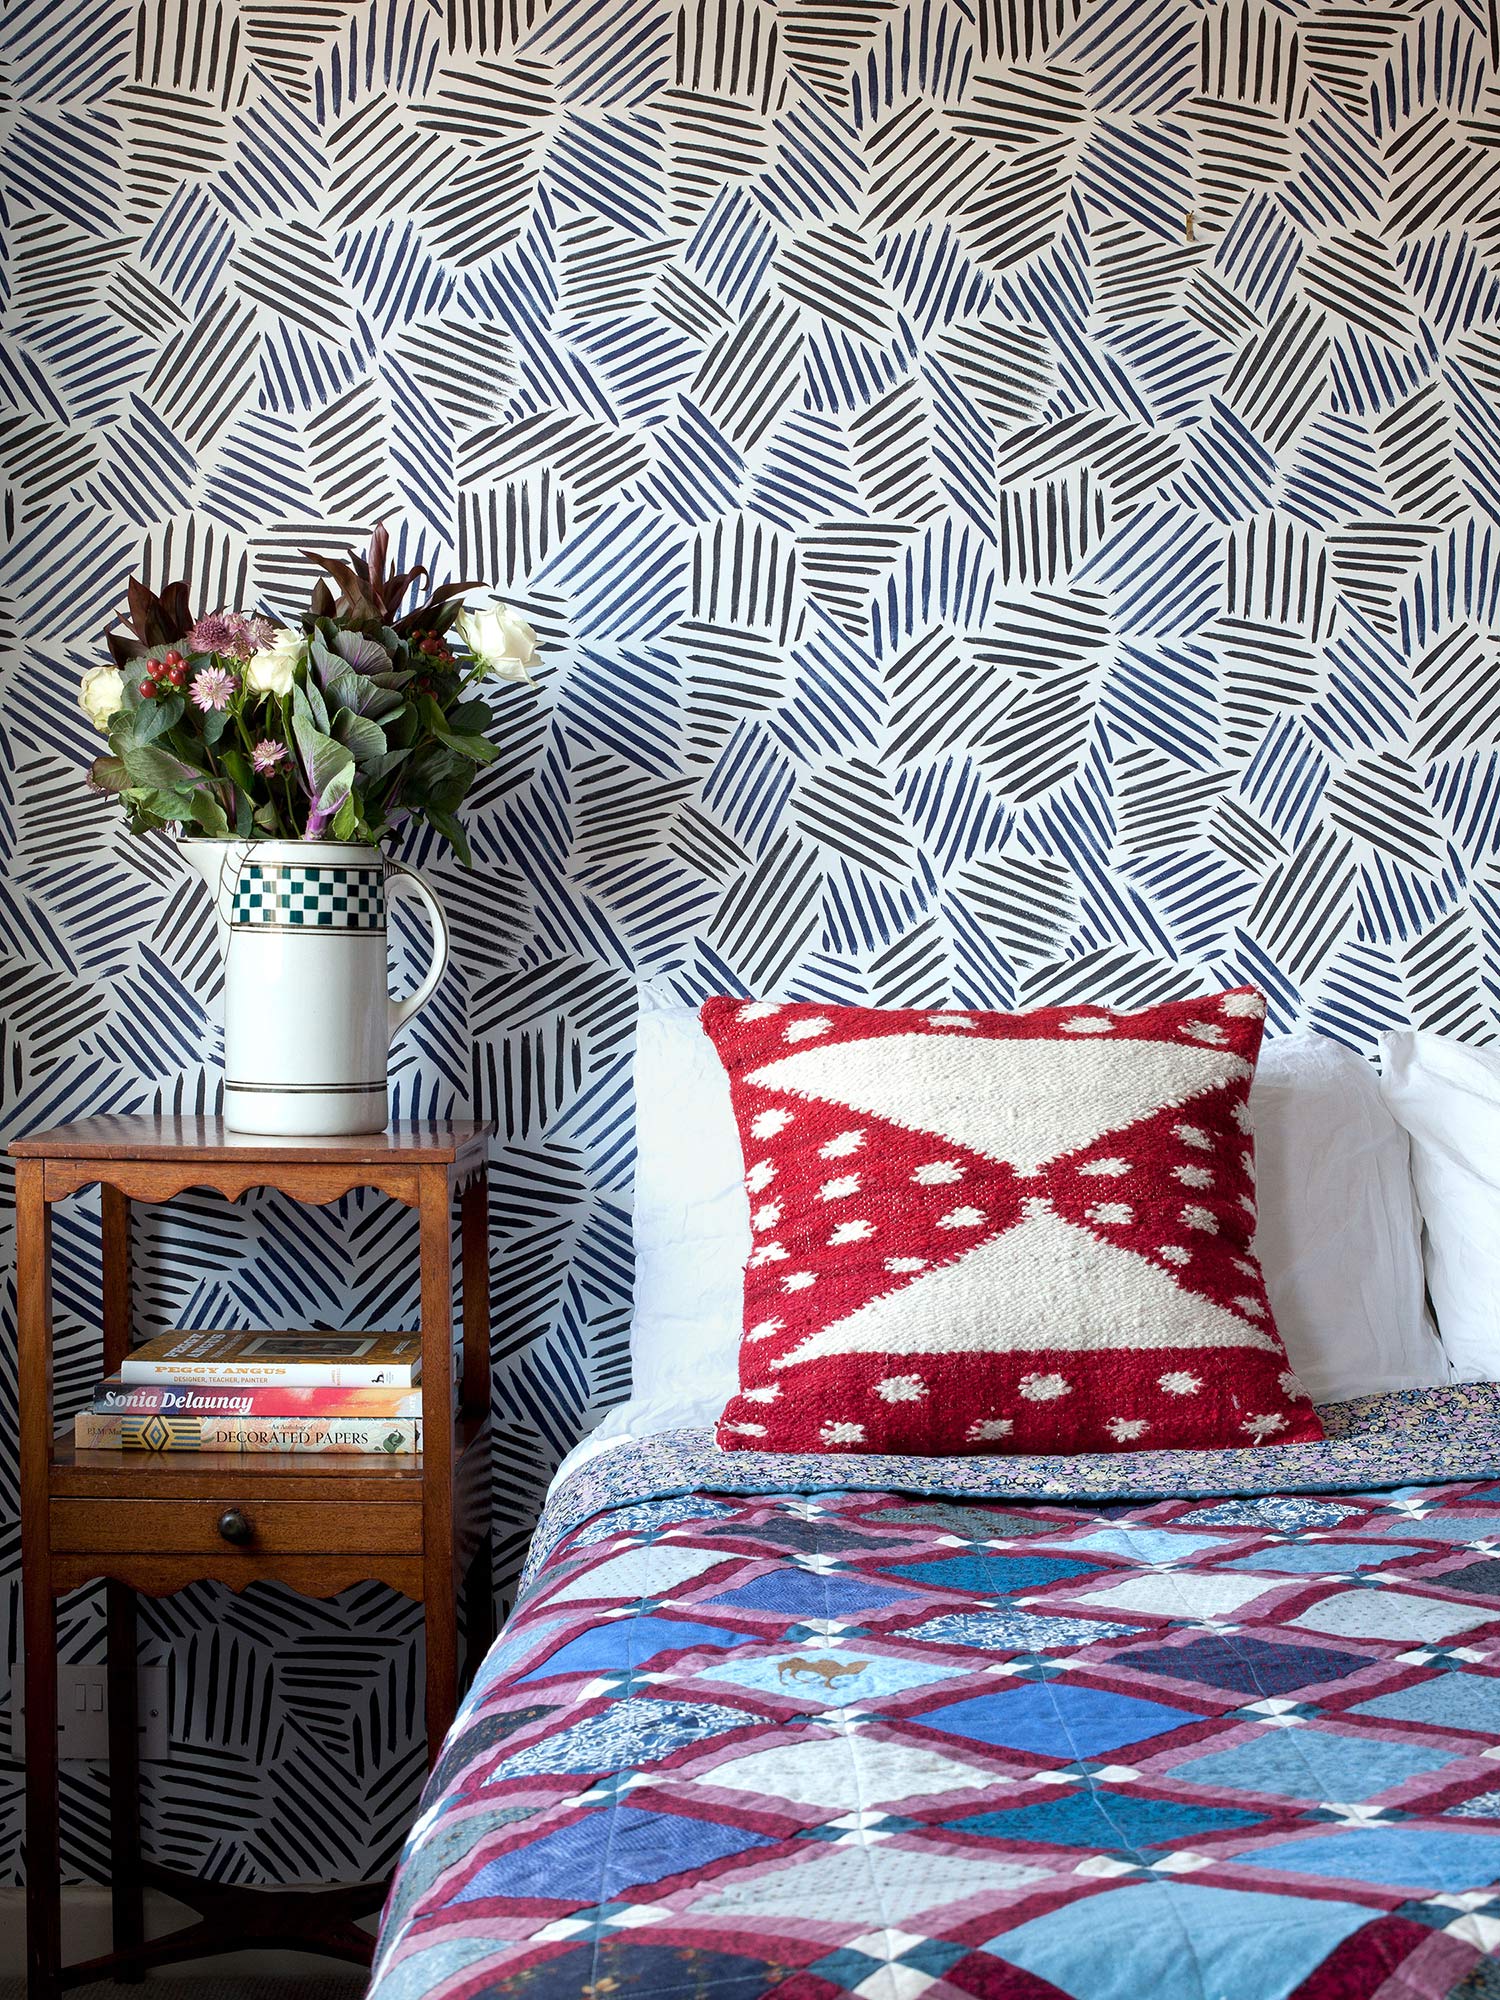 This wallpaper, inspired by New York artist Jasper Johns and the Bloomsbury Group, combines repeating black and navy blue brushstrokes to create a modern, abstract striped design, pictured with bed and red cushion, and wooden beside table with flowers